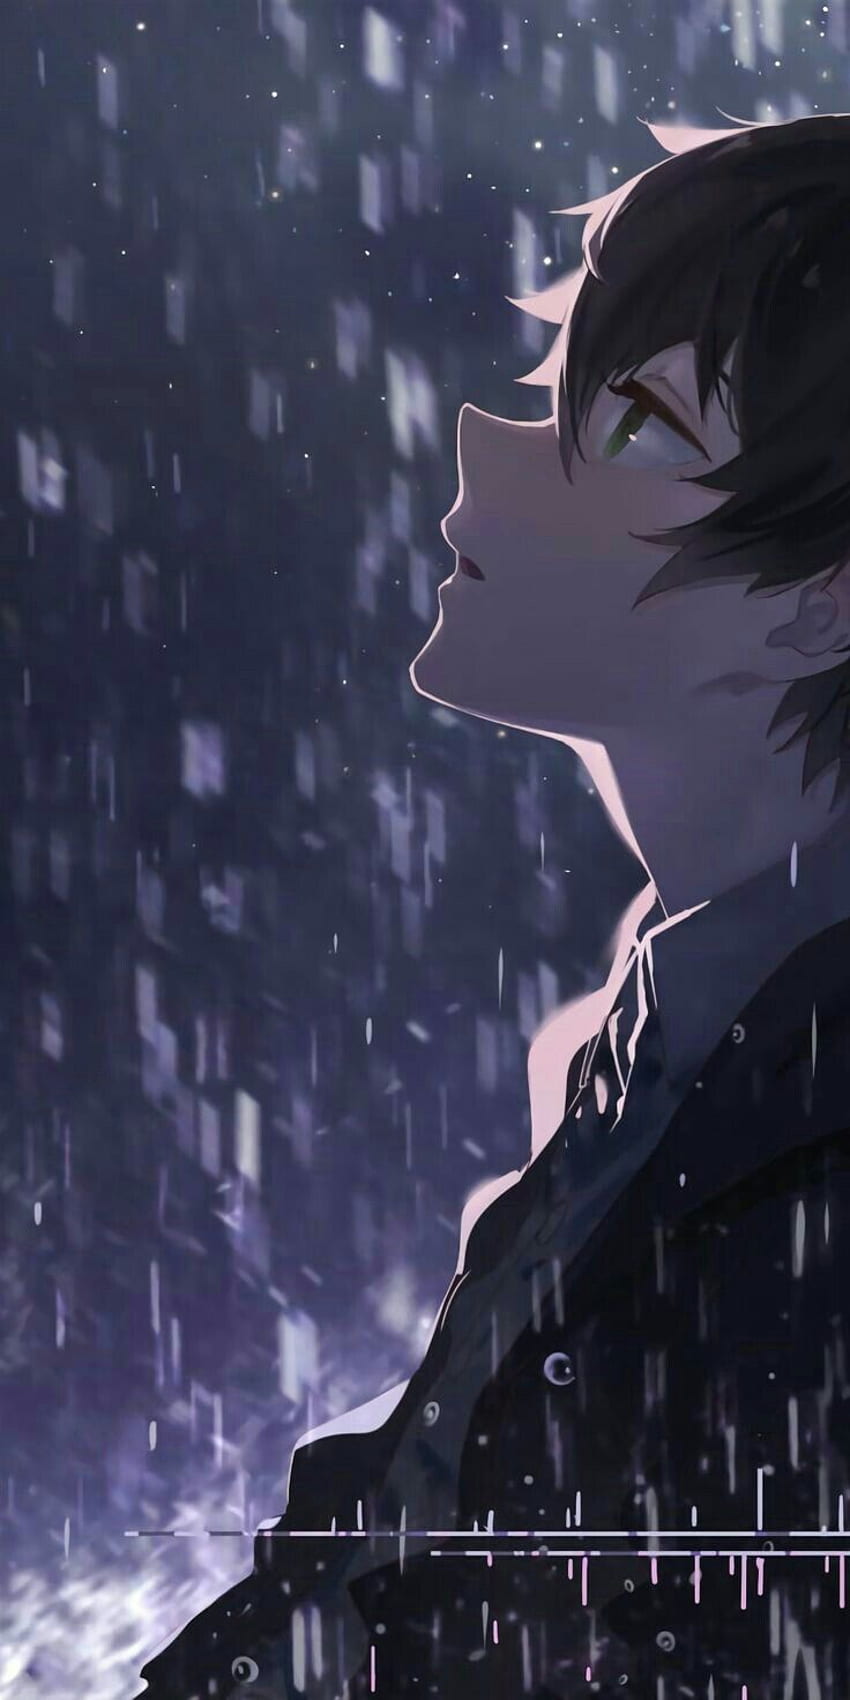 Sad Anime Wallpapers  Top 35 Best Sad Anime Backgrounds Download